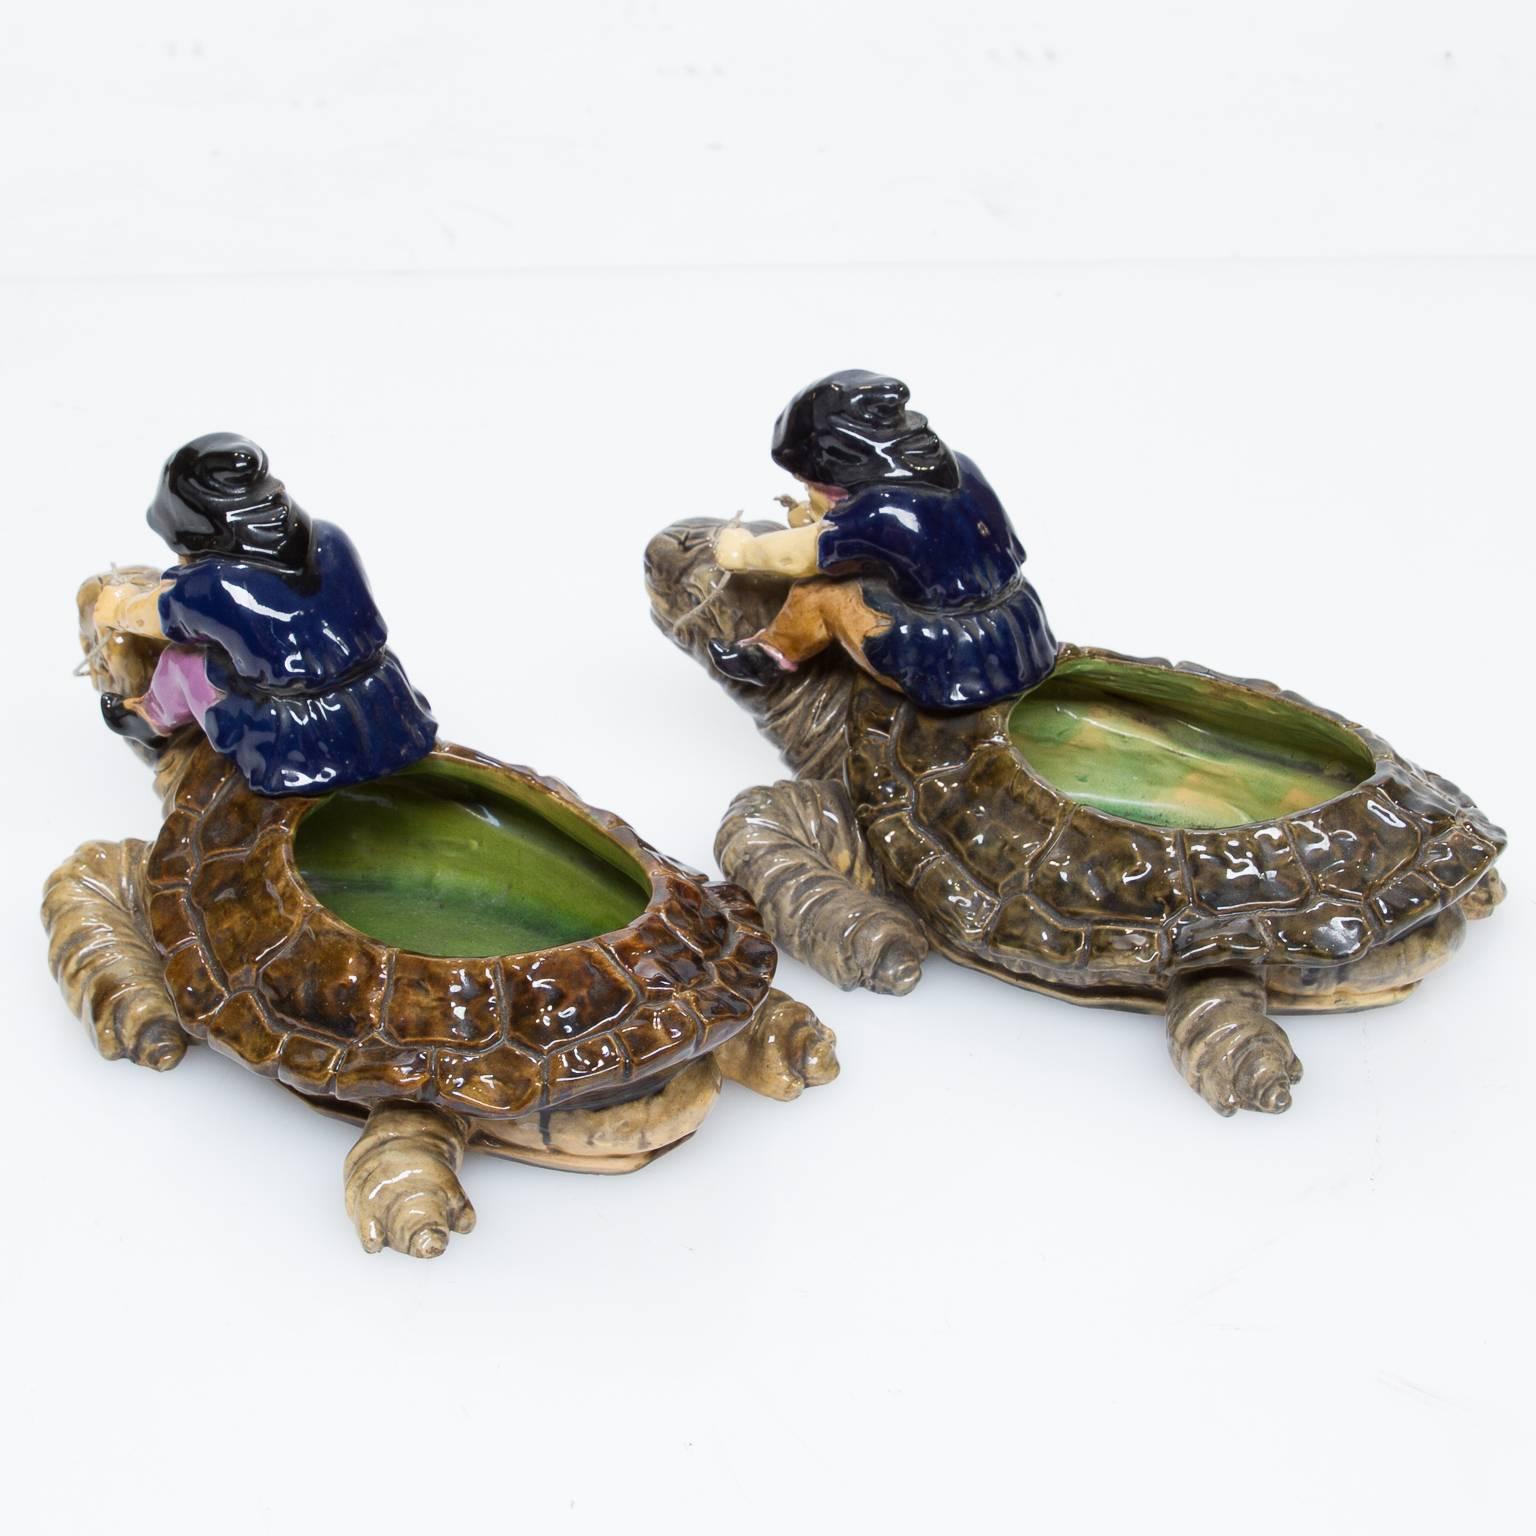 Great Britain (UK) Vintage Majolica Goblin's Riding a Turtle